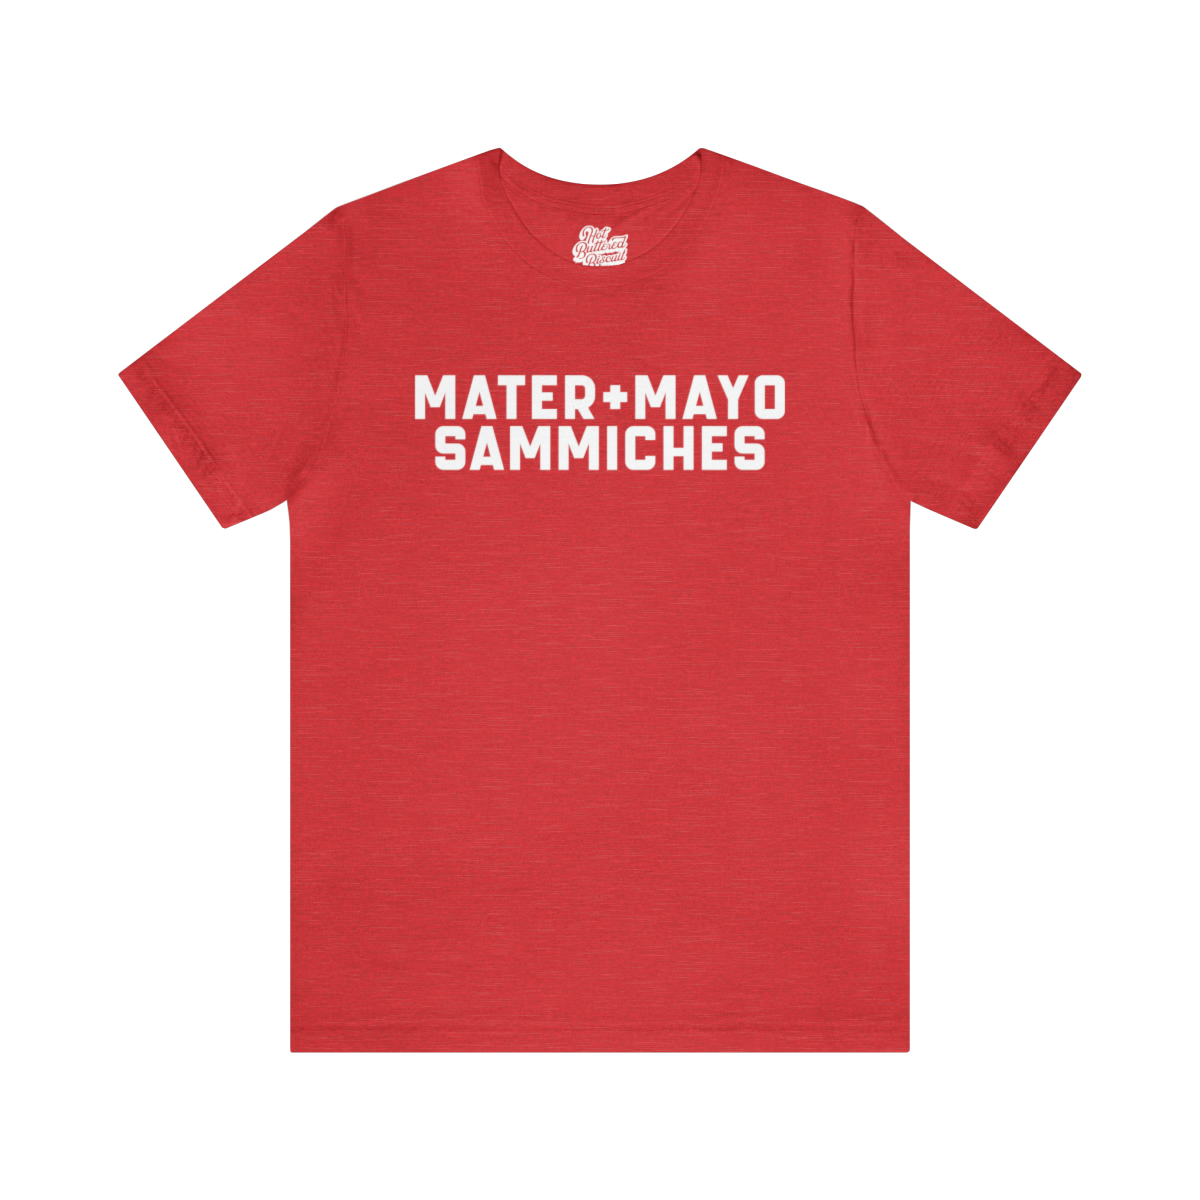 Introducing our “Mater and Mayo Sammiches” shirt – a deliciously nostalgic tribute to Southern comfort and flavor! 🍅🥪 Embrace the heartwarming simplicity of this classic combination that takes you back…